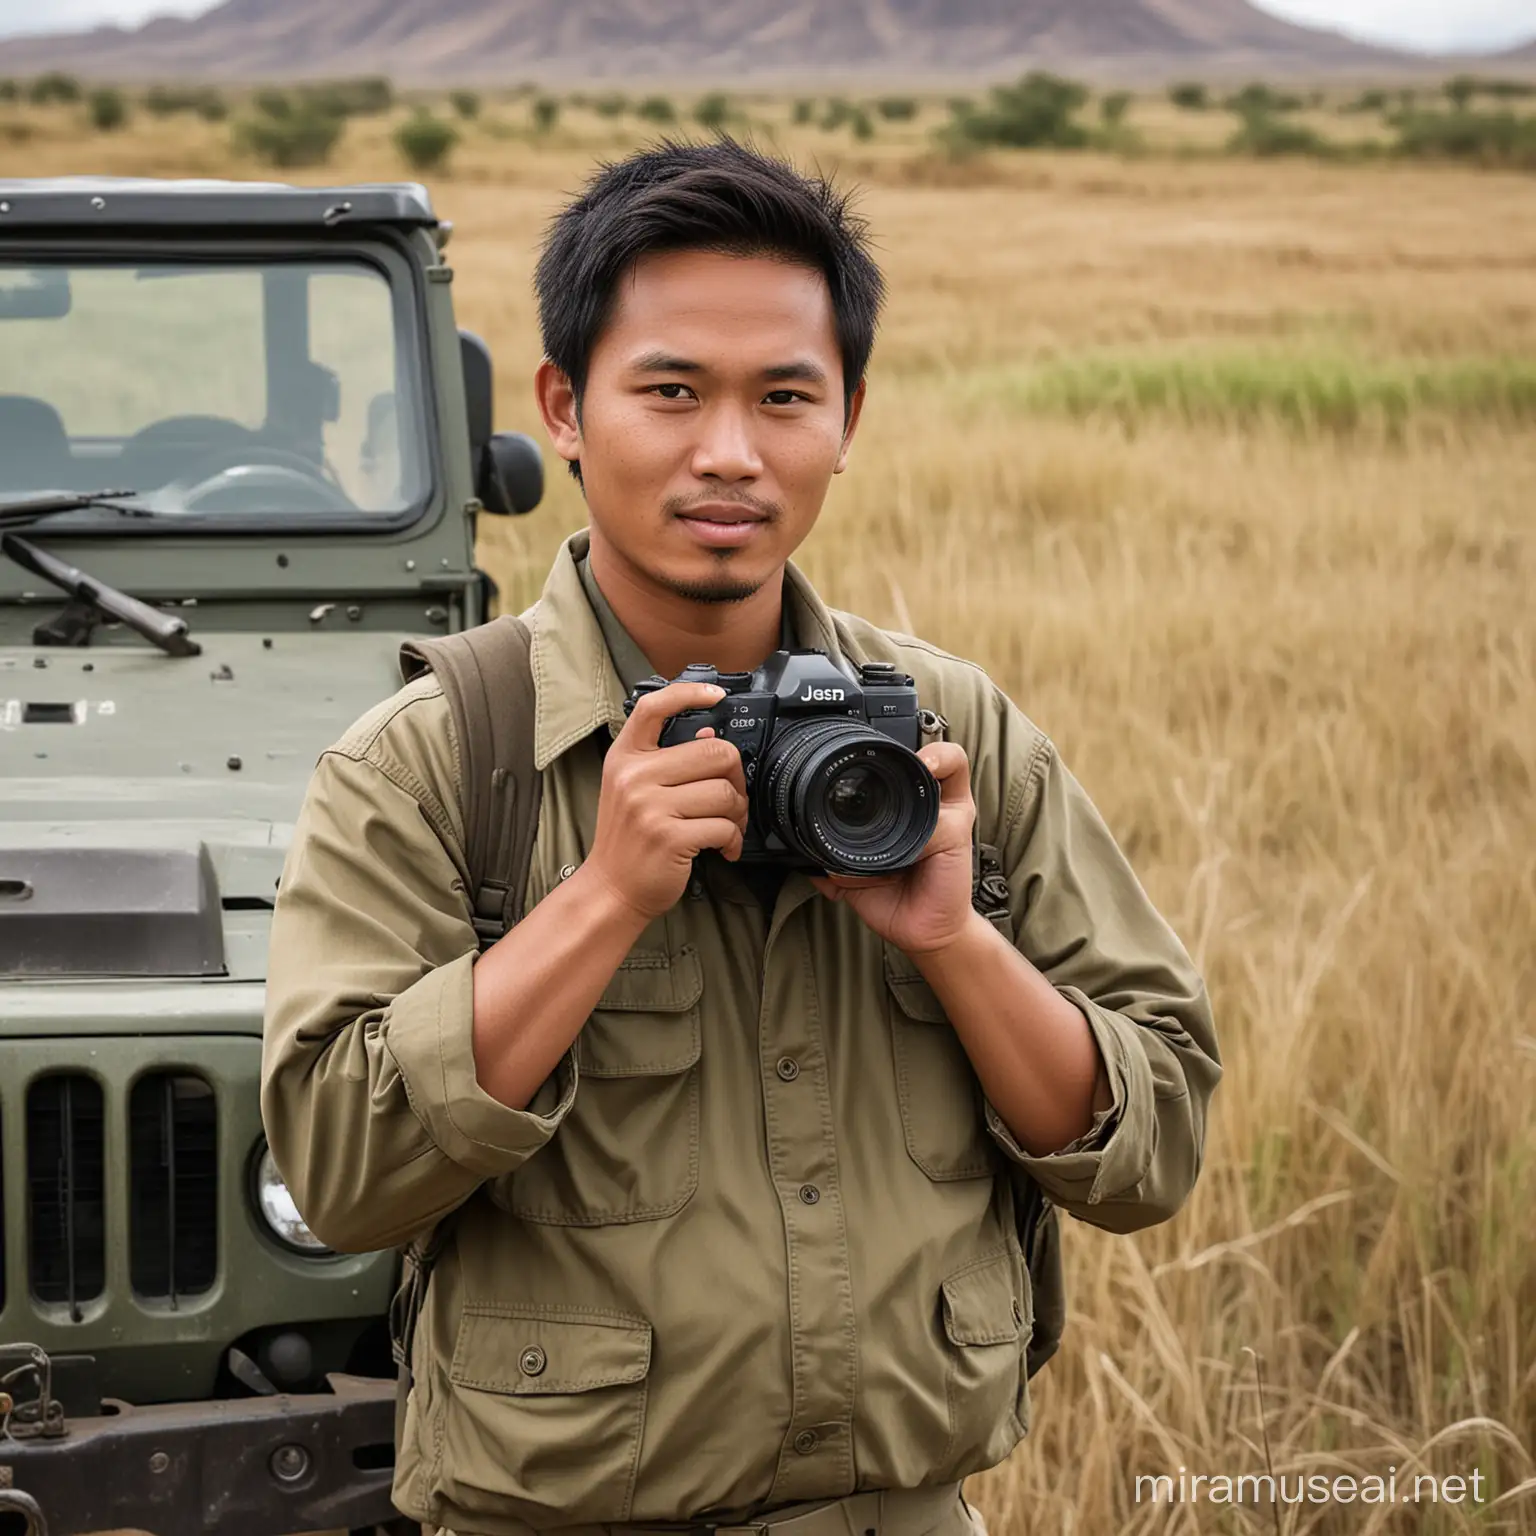 Handsome Indonesian Man with Telephoto Camera in Grassland Setting